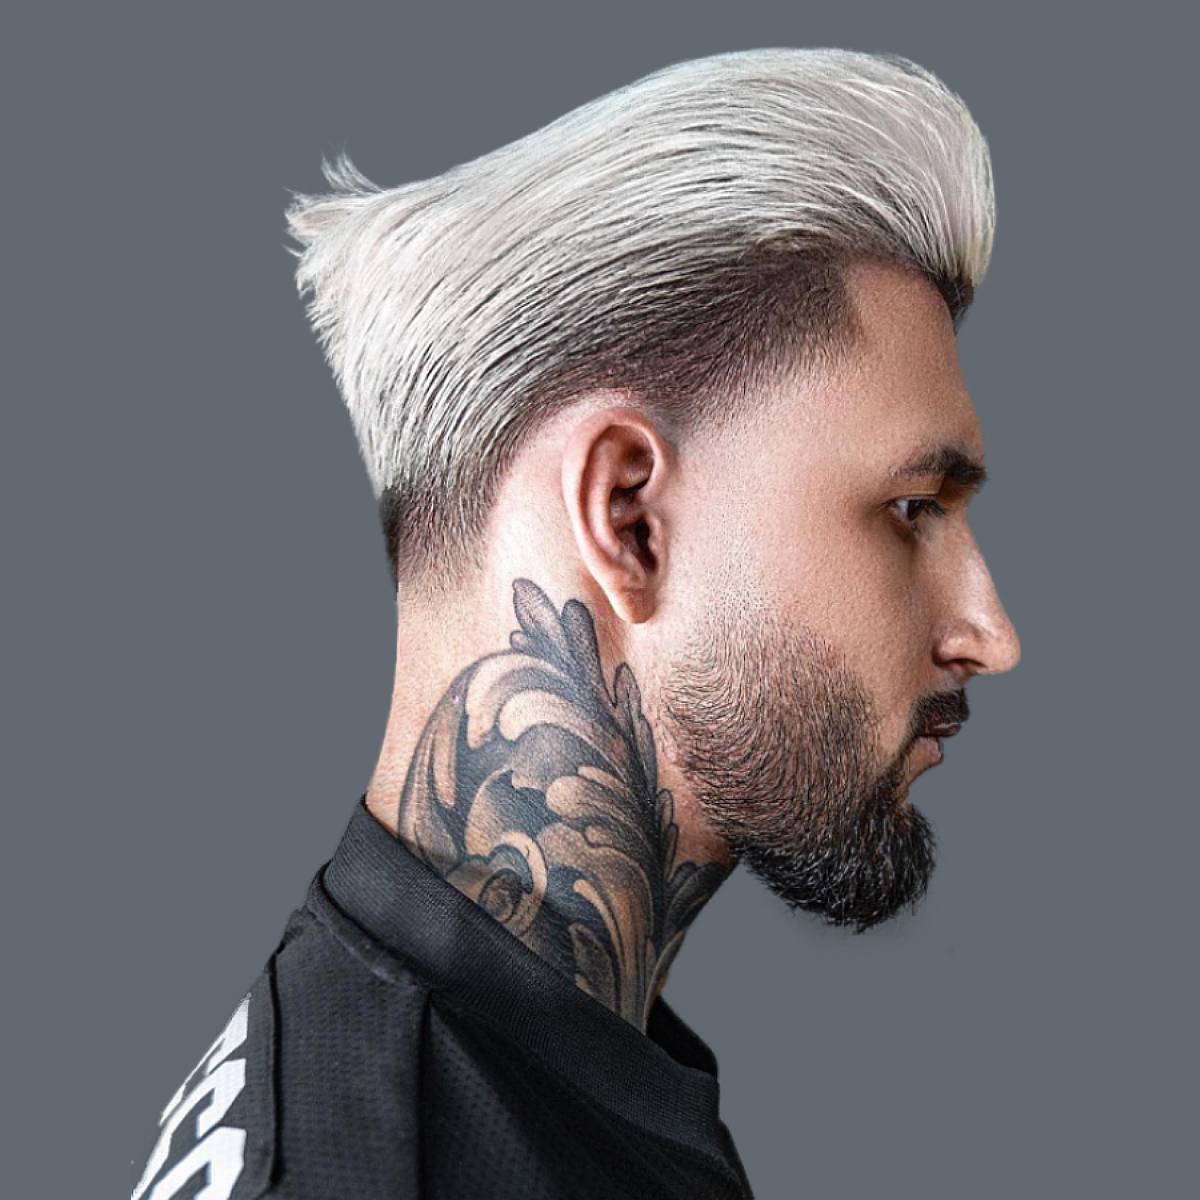 The Taper Fade Haircut: A Timeless Trend That Continues to Rise